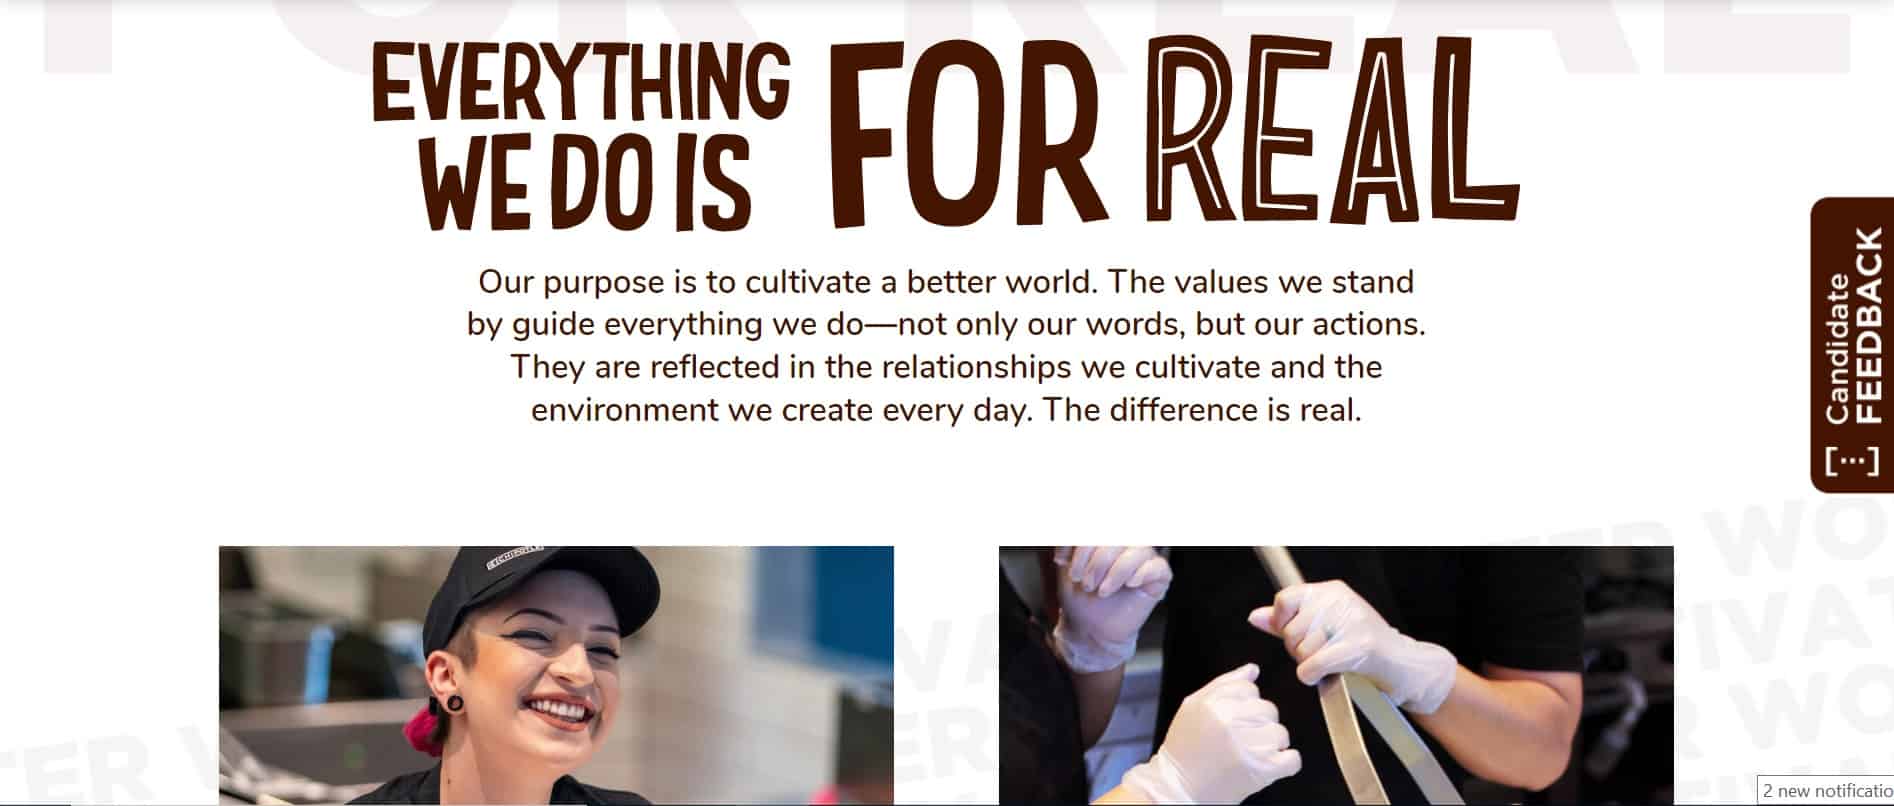 The Chipotle core values include working hard together to provide the best possible customer experience.